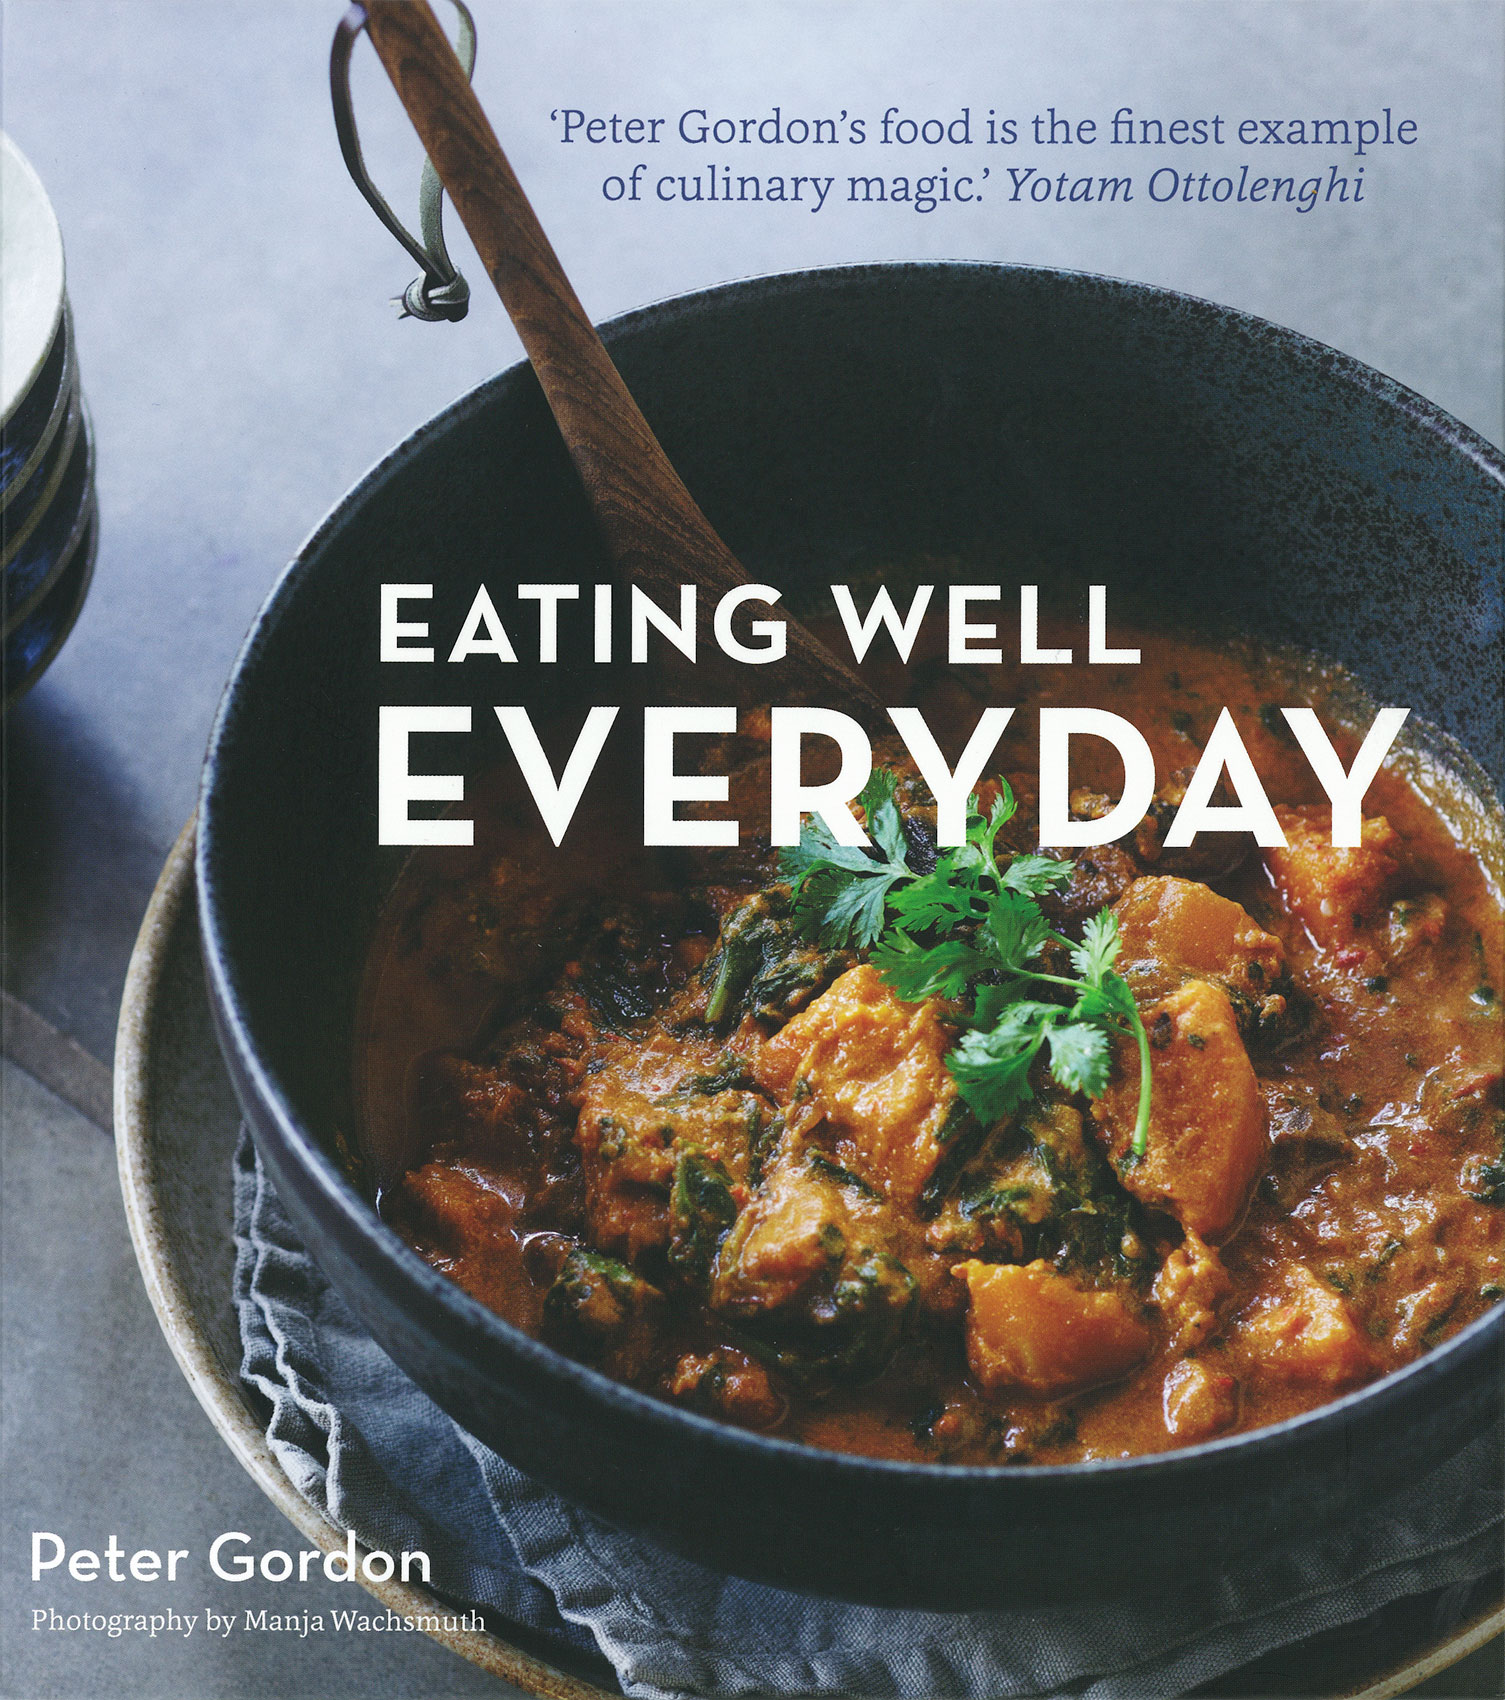 Everyday • Eating Well Cookbook Cover by NZ Fusion Chef Peter Gordon • Hospitality & Editorial Food Photography